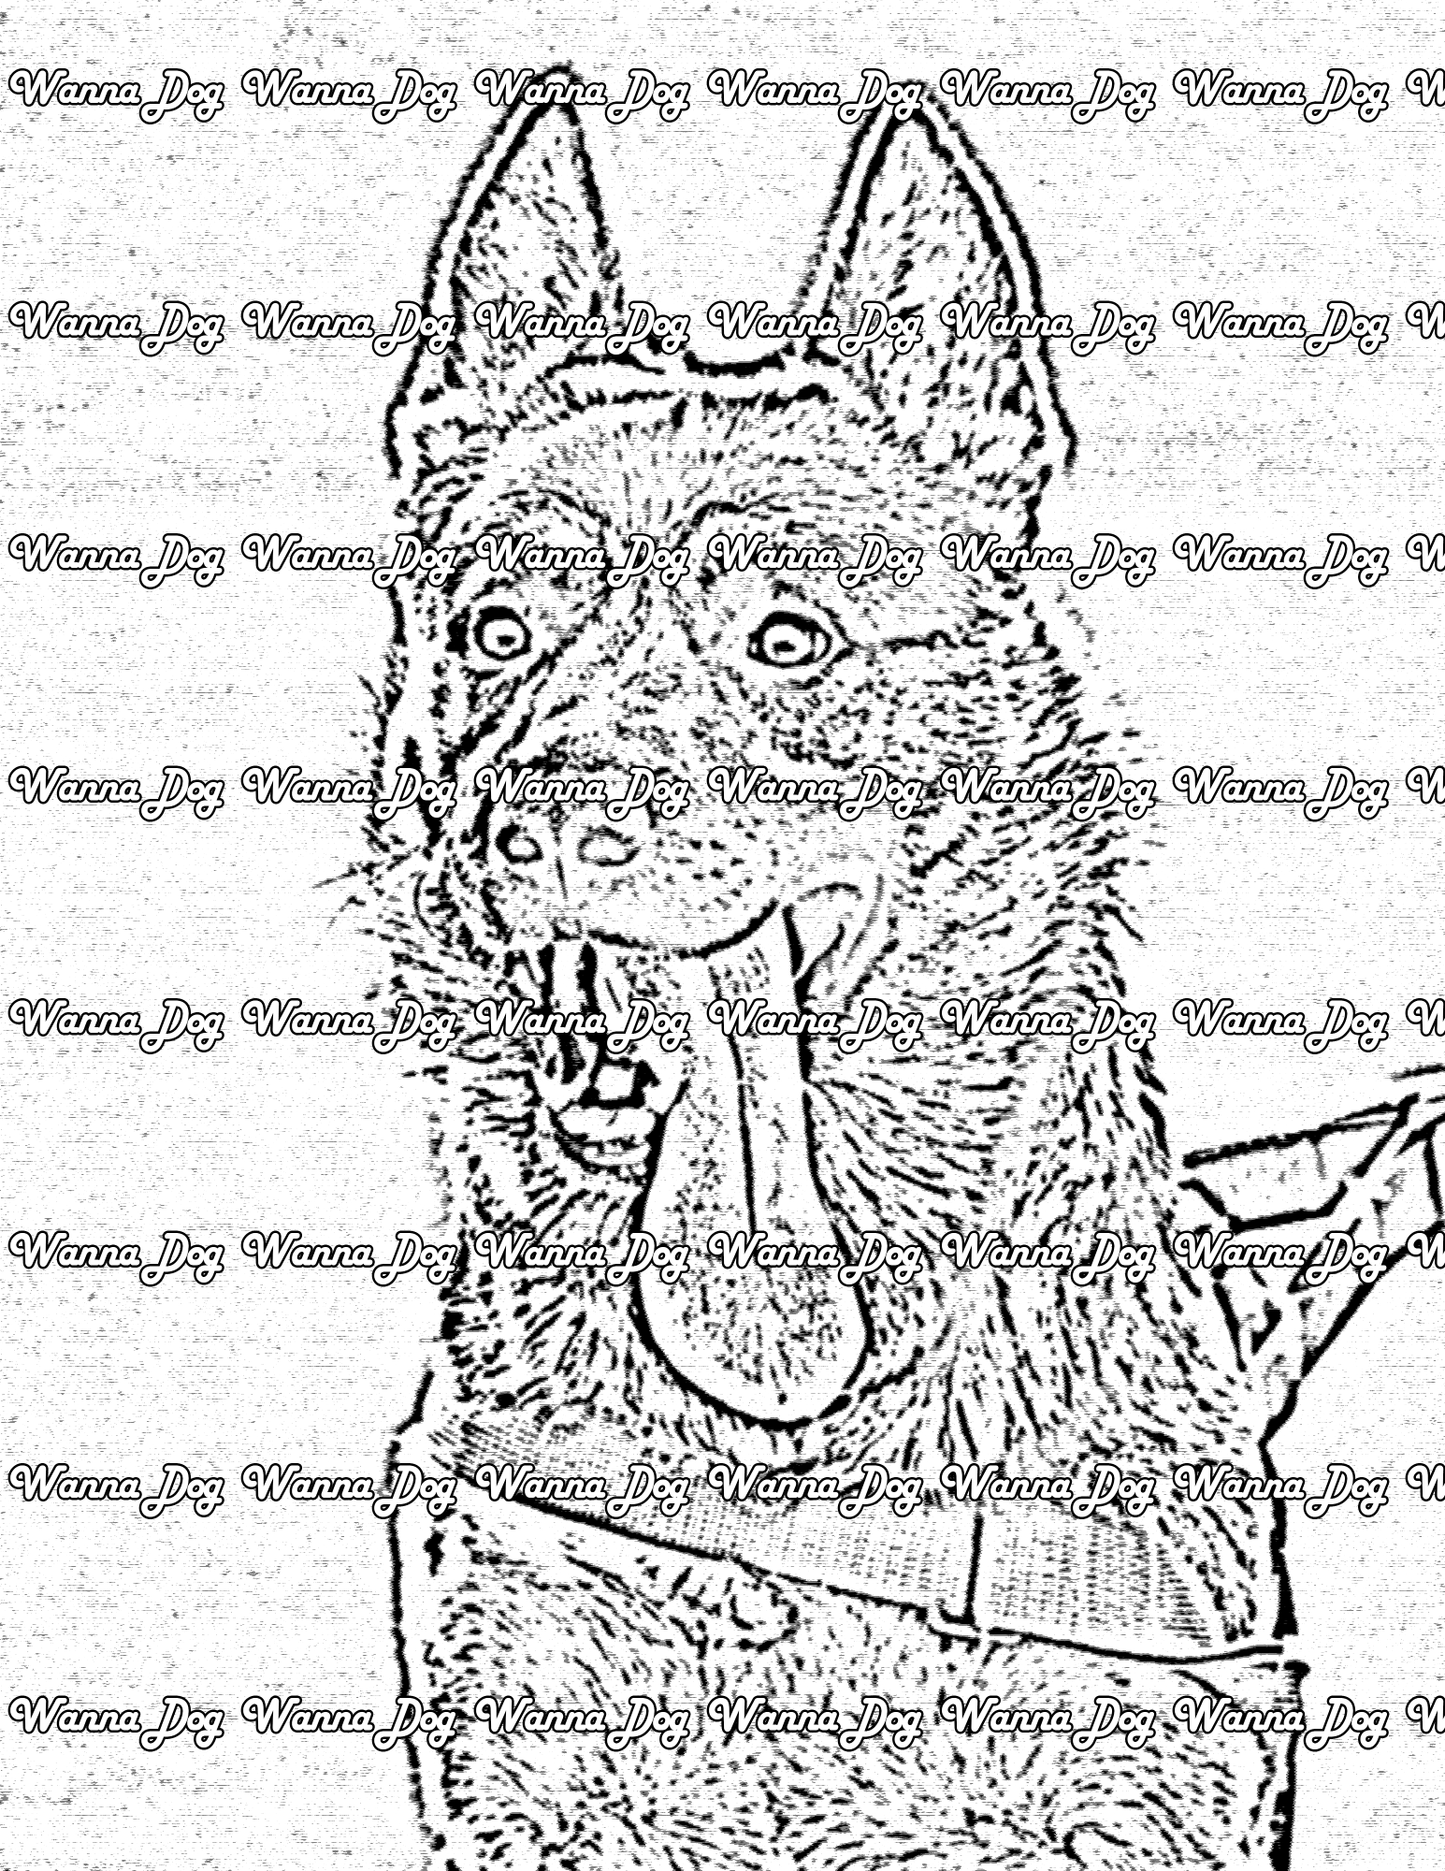 German Shepherd Coloring Page of a German Shepherd with their tongue out